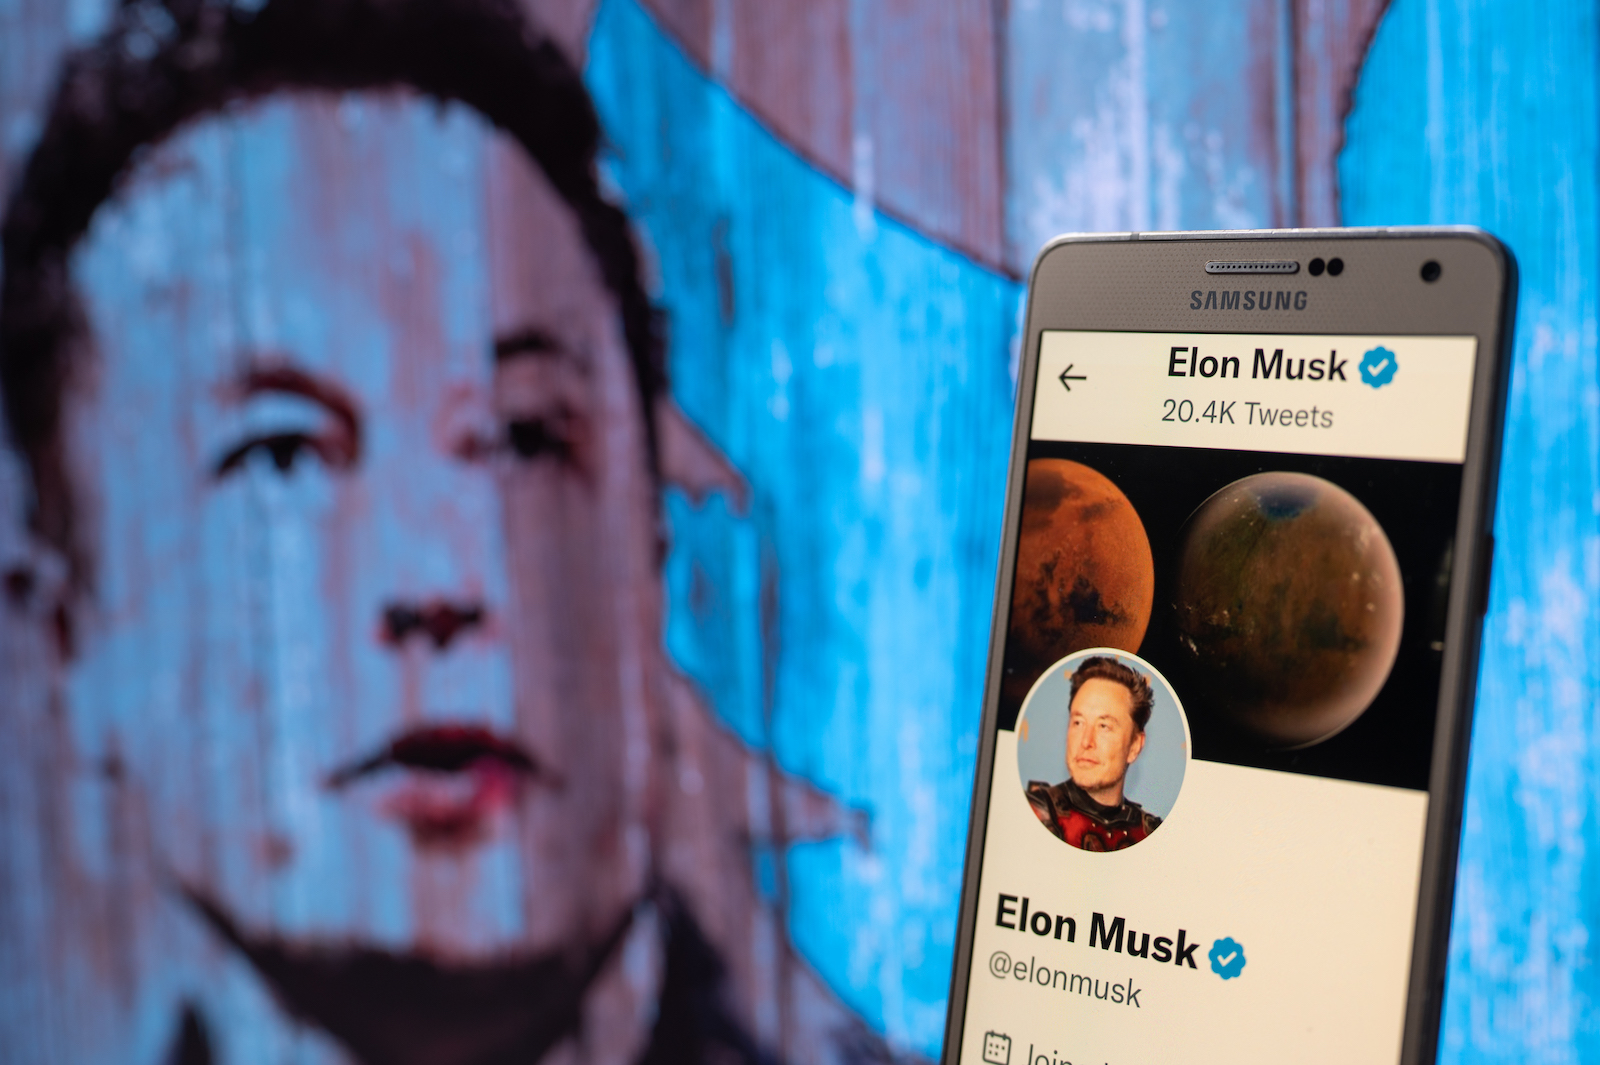 Elon Musk's Twitter account displayed on a mobile with Elon Musk in the background are seen in this illustration. In Brussels - Belgium on 19 November 2022.  (Photo illustration by Jonathan Raa/NurPhoto)